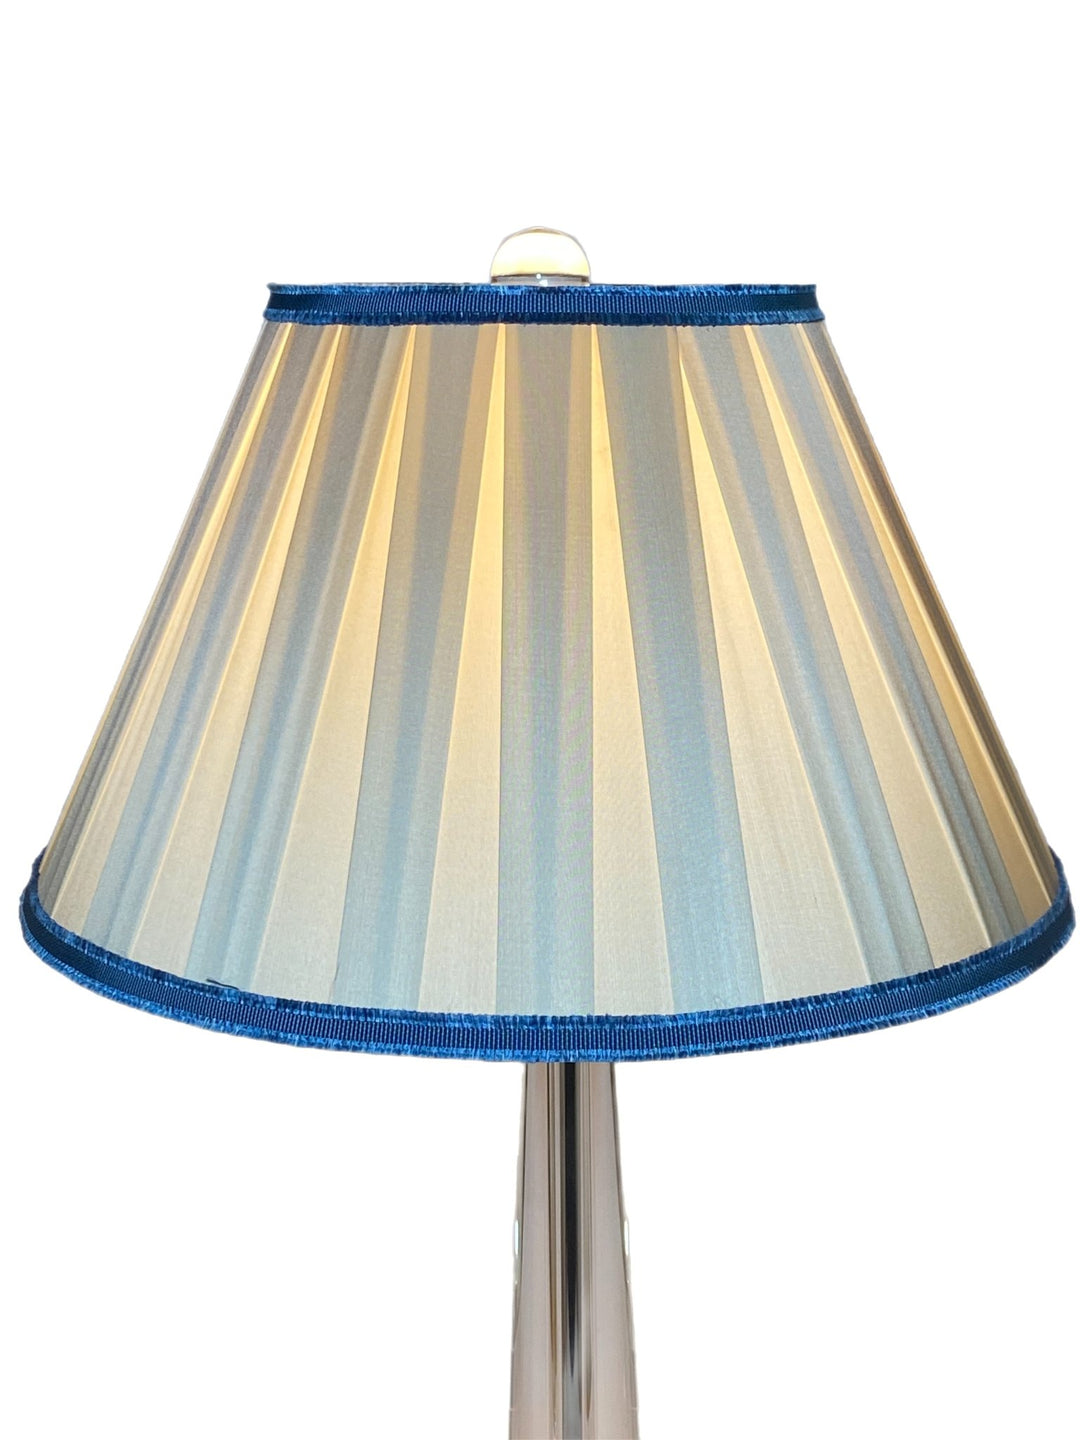 Box Pleat Silk Empire Lamp Shade - Available in Six Sizes + Add Silk Trim - Lux Lamp Shades